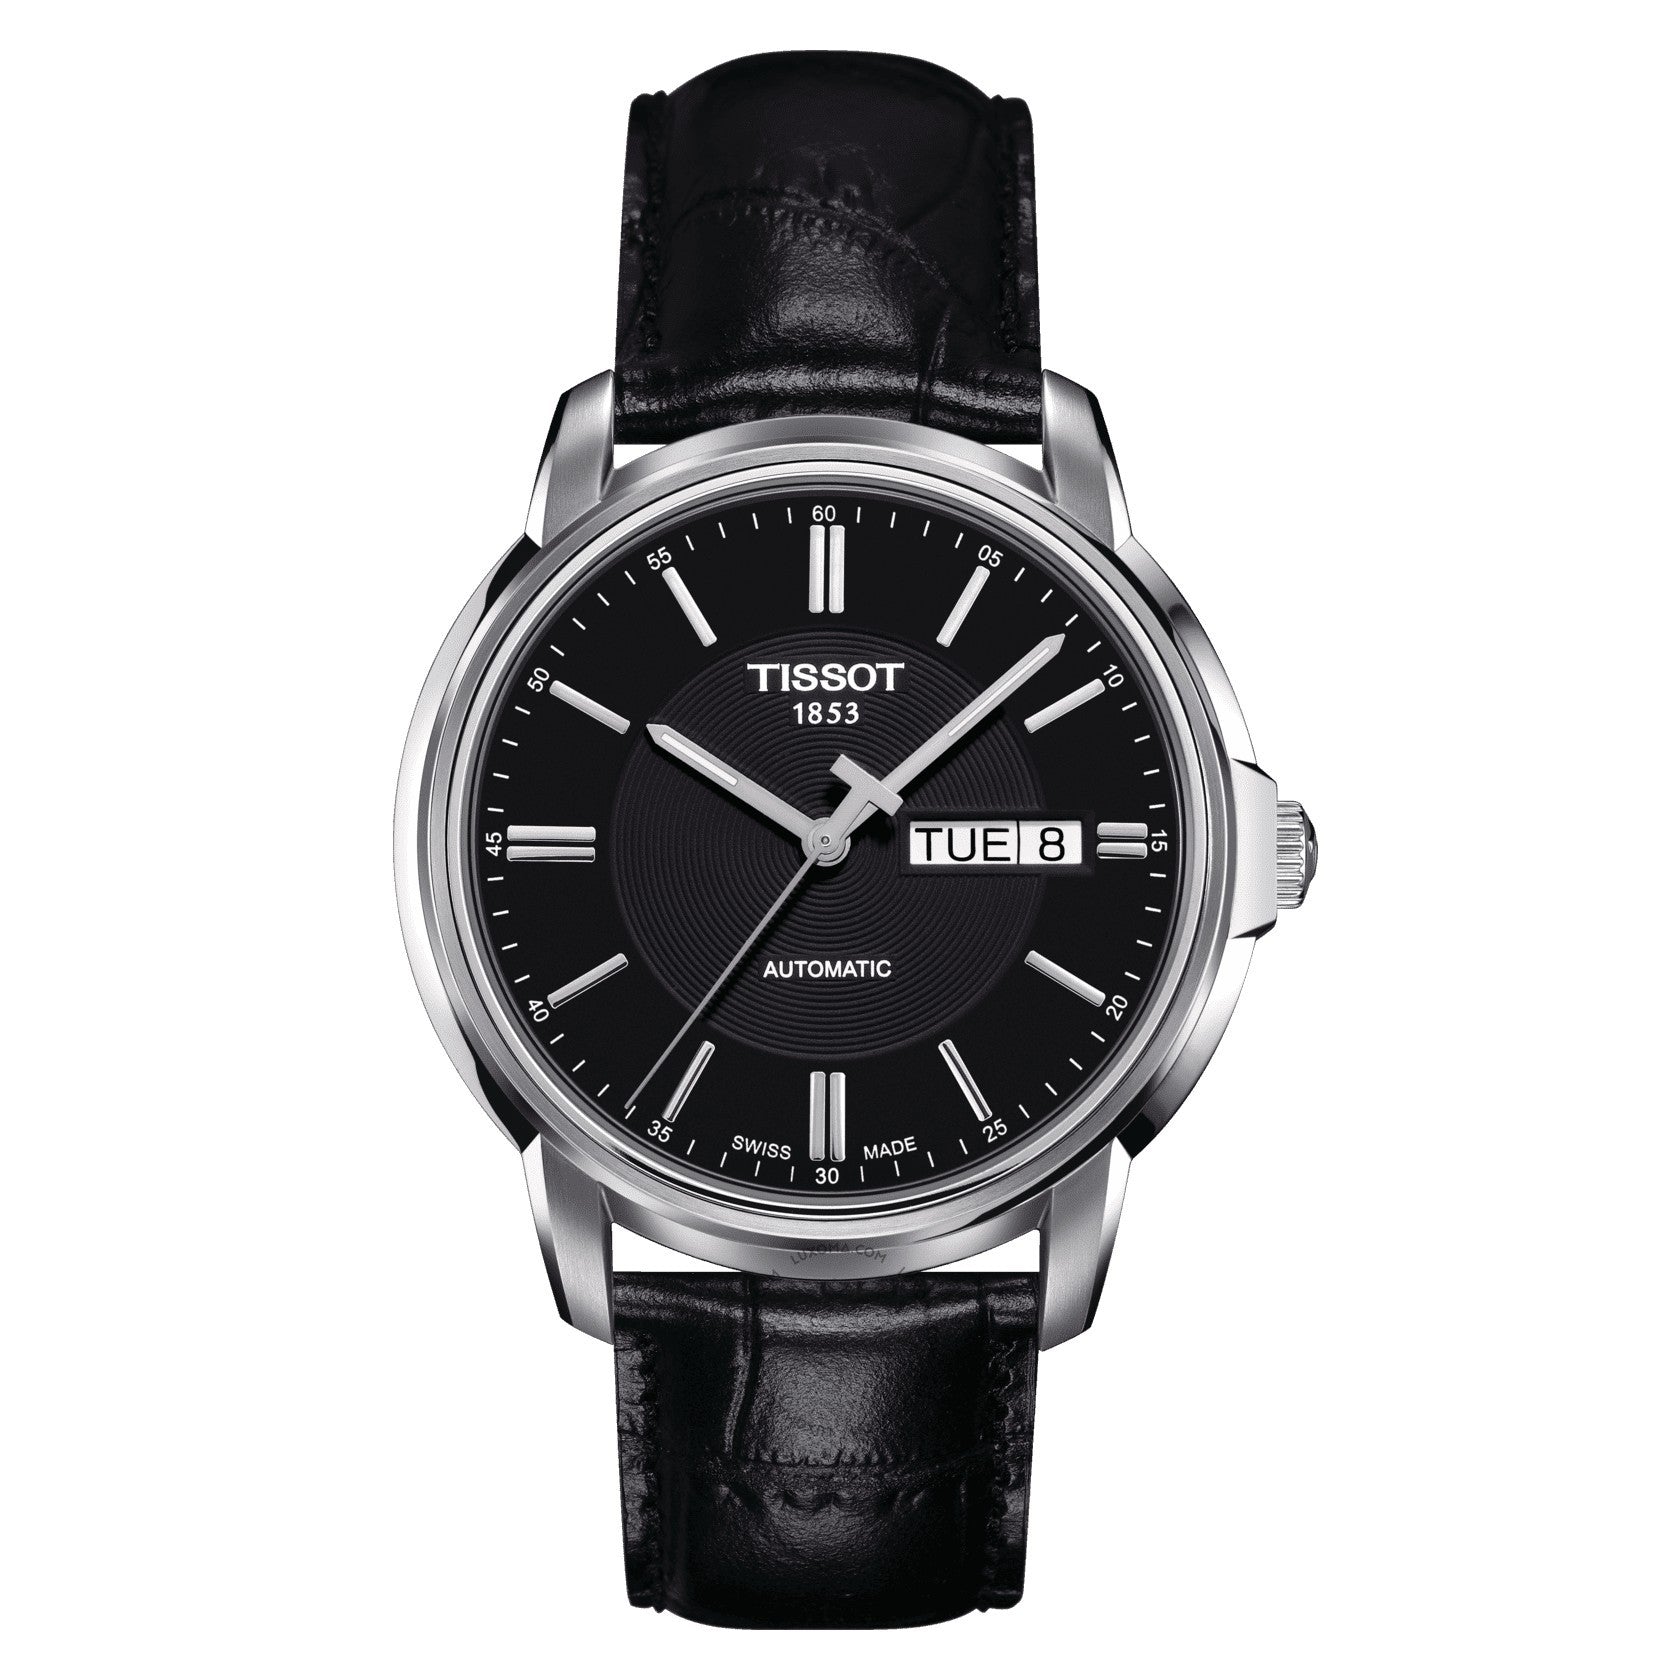 Tissot Automatic III Automatic Black Dial Men's Watch T065.430.16.051.00